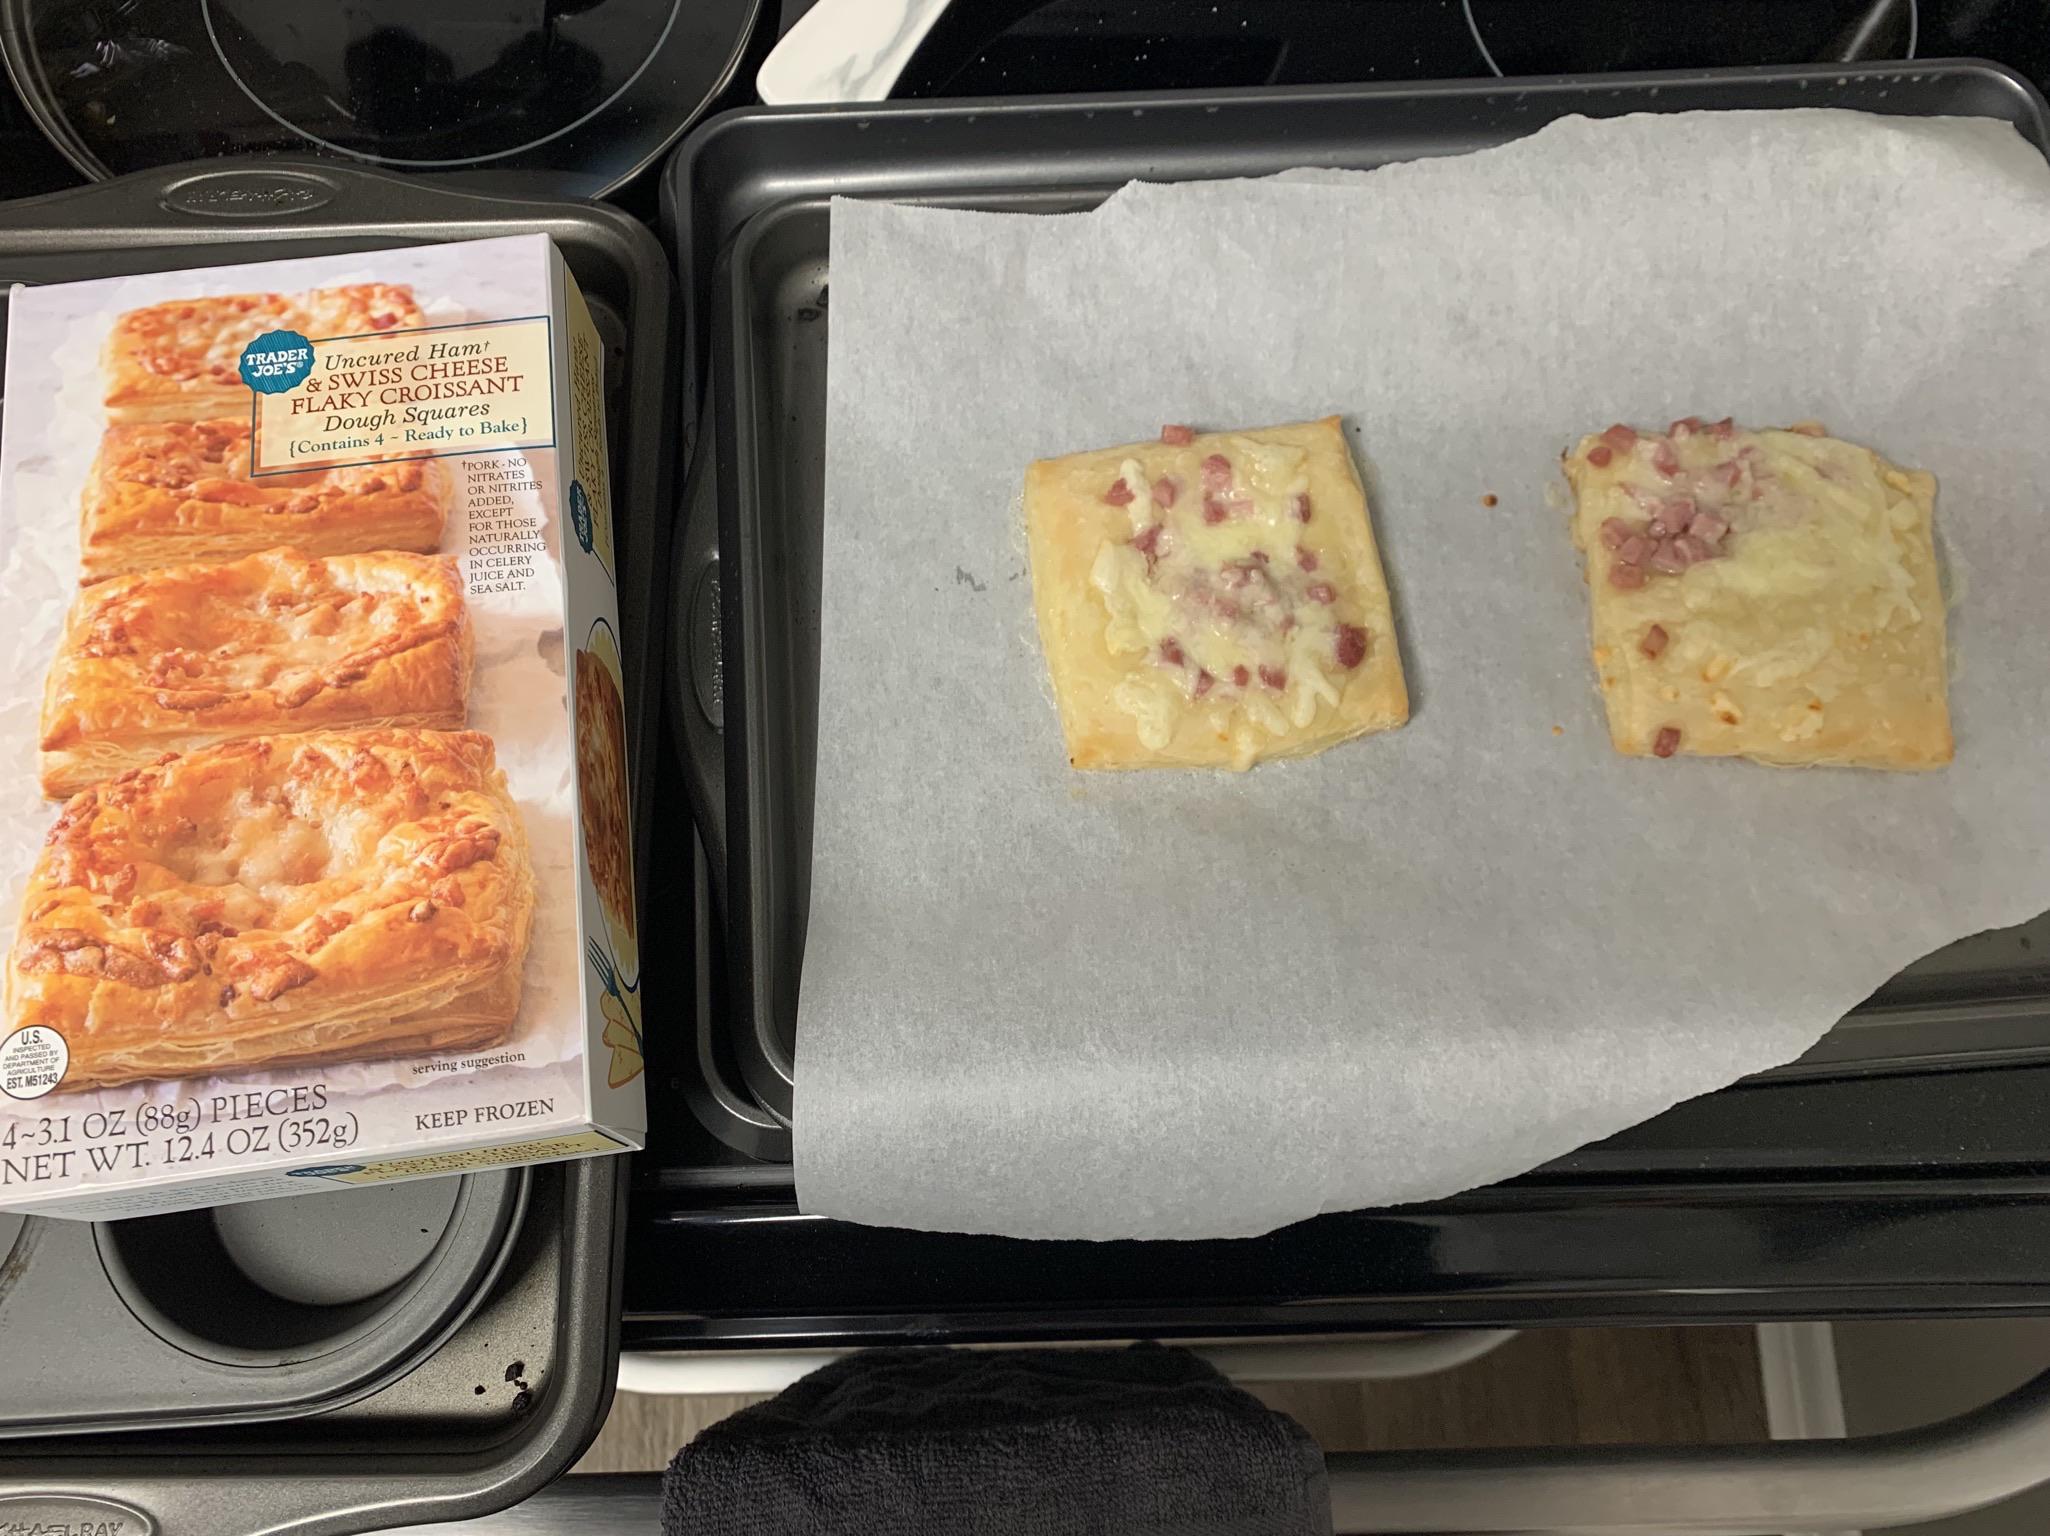 breakfast - Uncured Hamt & Swiss Cheese Flaky Croissant Dough Squares Contains 4 Ready to Bake Pork.No Nitrates Or Nitrites Added, Except For Those Naturally Occurring In Celery Juice And Sea Salt. Ao Rassed By Dertment Of Agriculture serving suggestion E